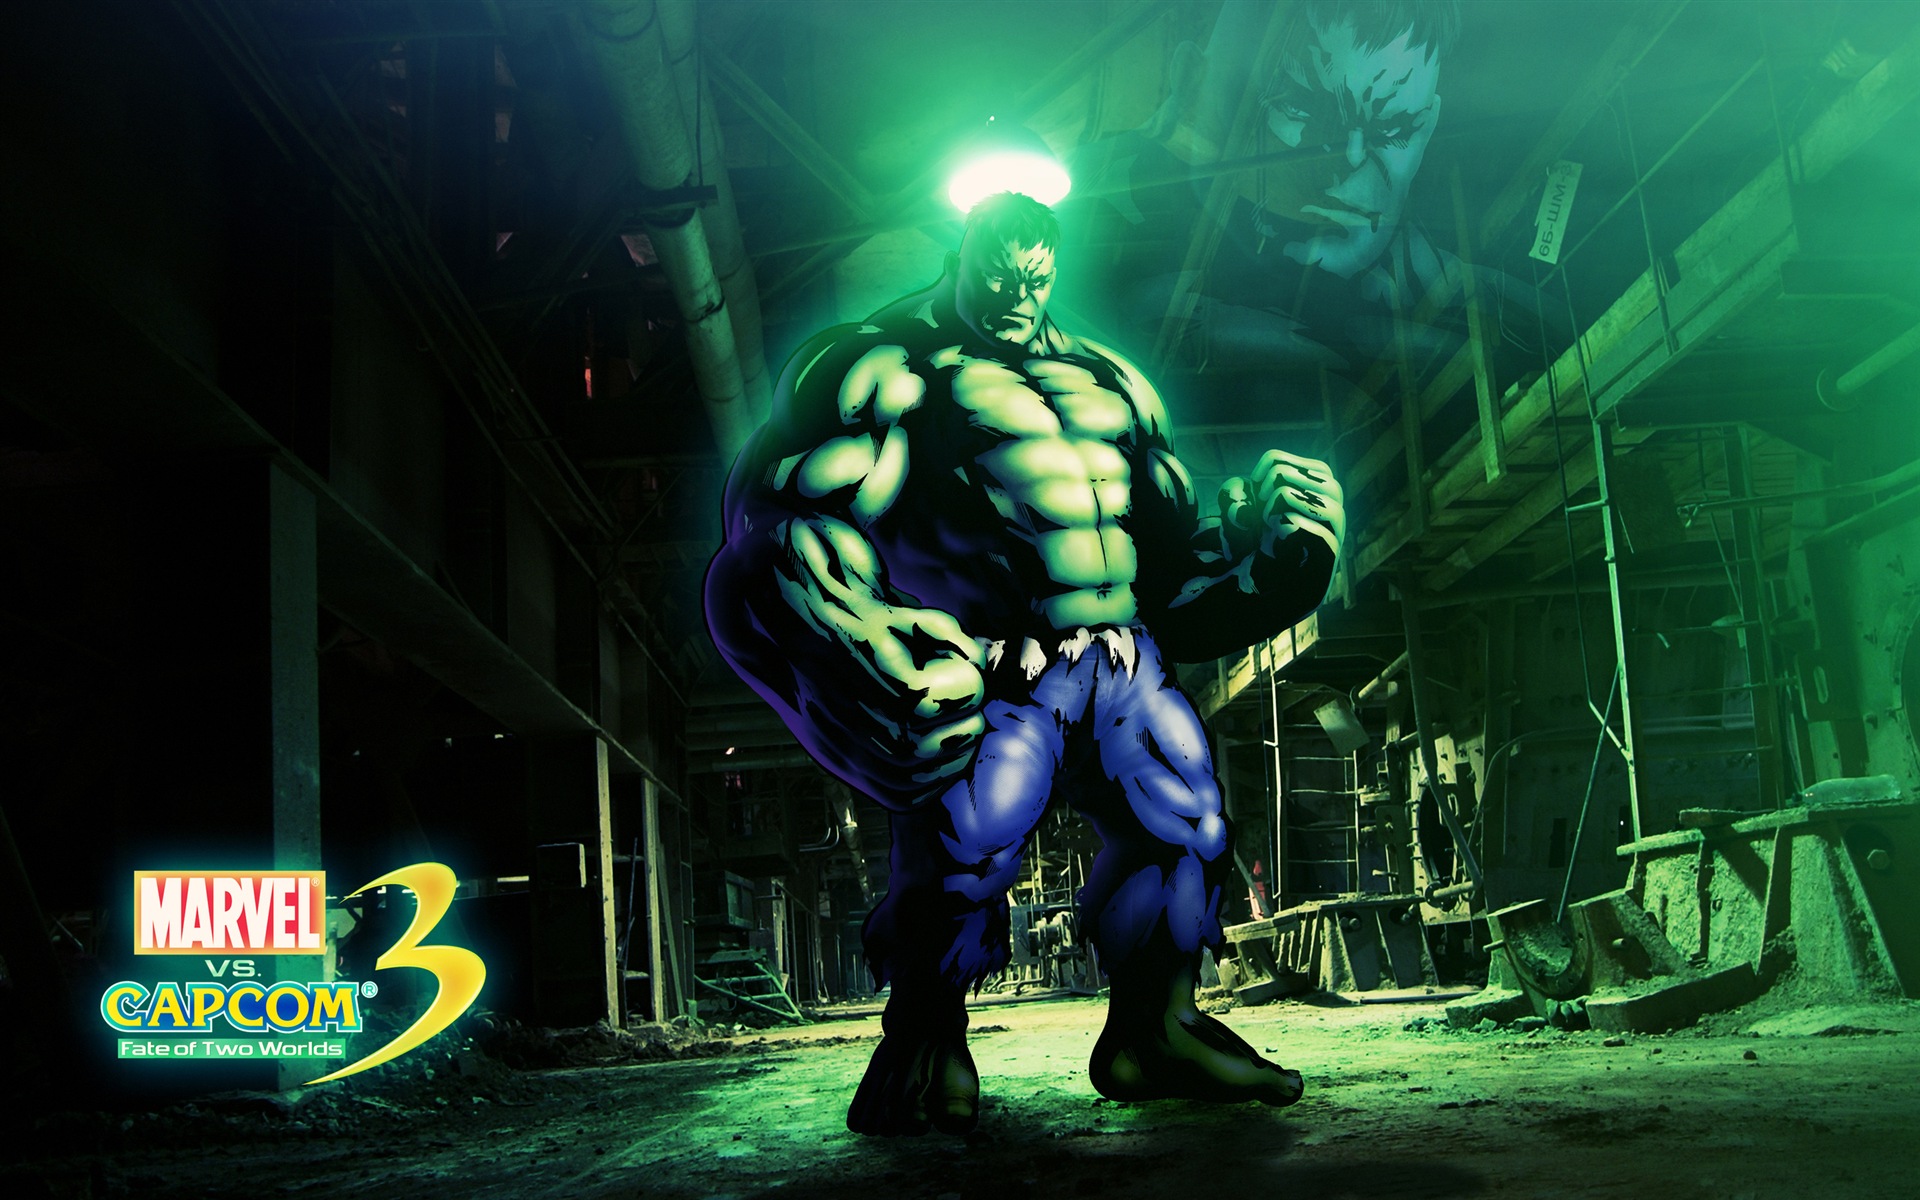 Marvel VS. Capcom 3: Fate of Two Worlds HD game wallpapers #11 - 1920x1200